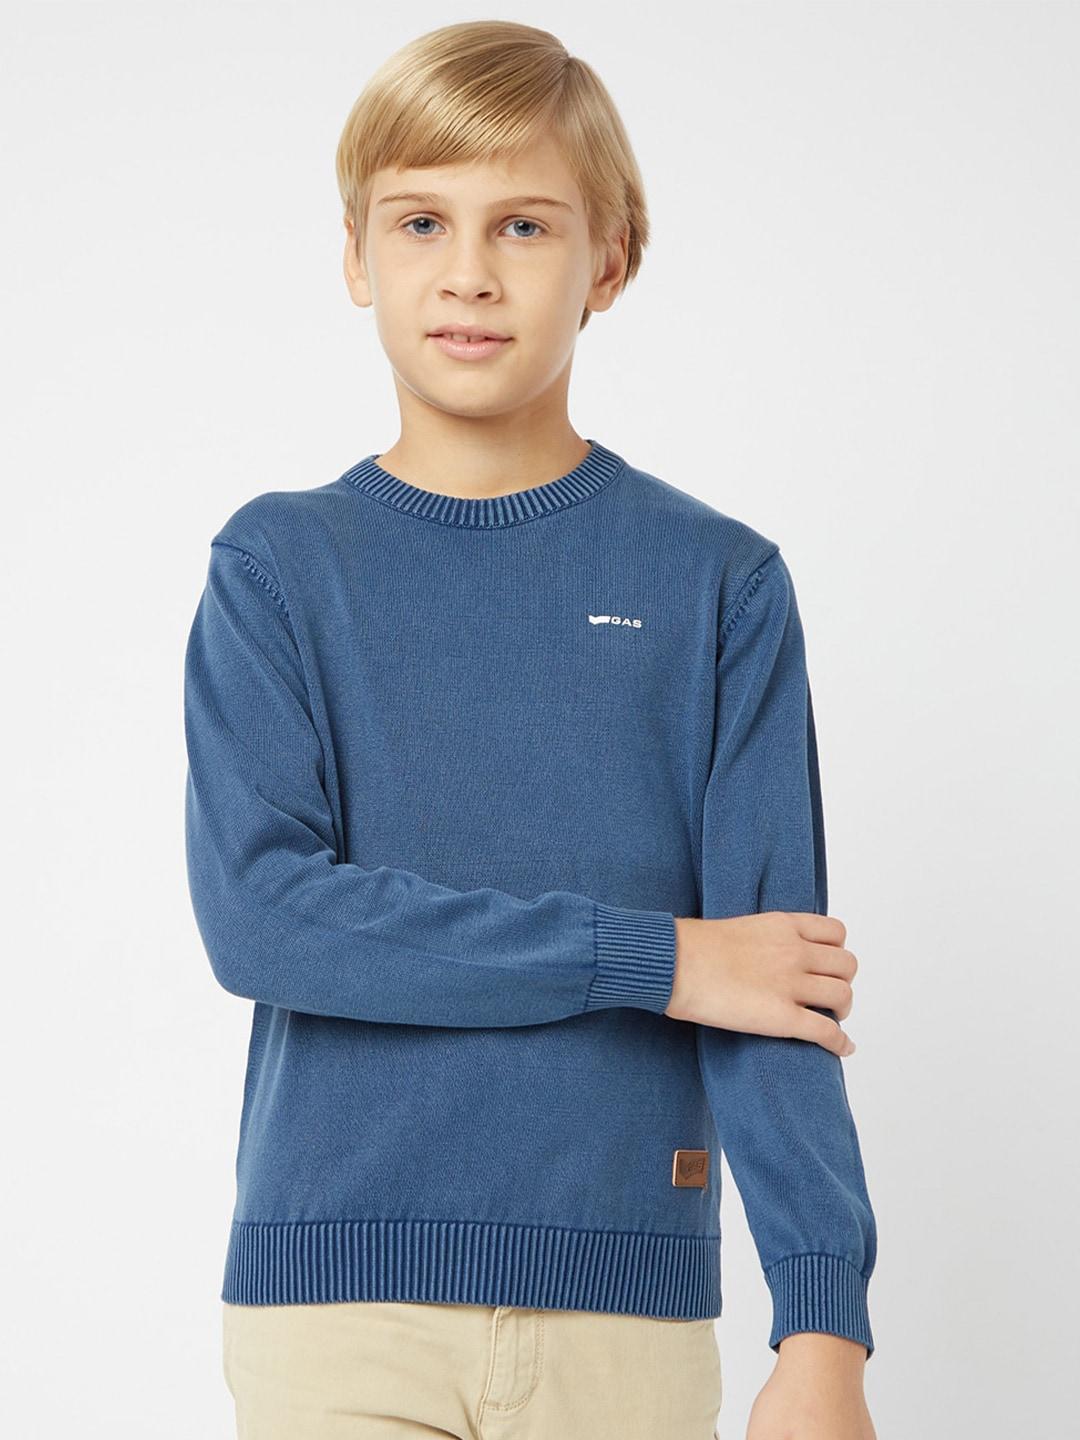 GAS Boys Cotton Pullover Sweater